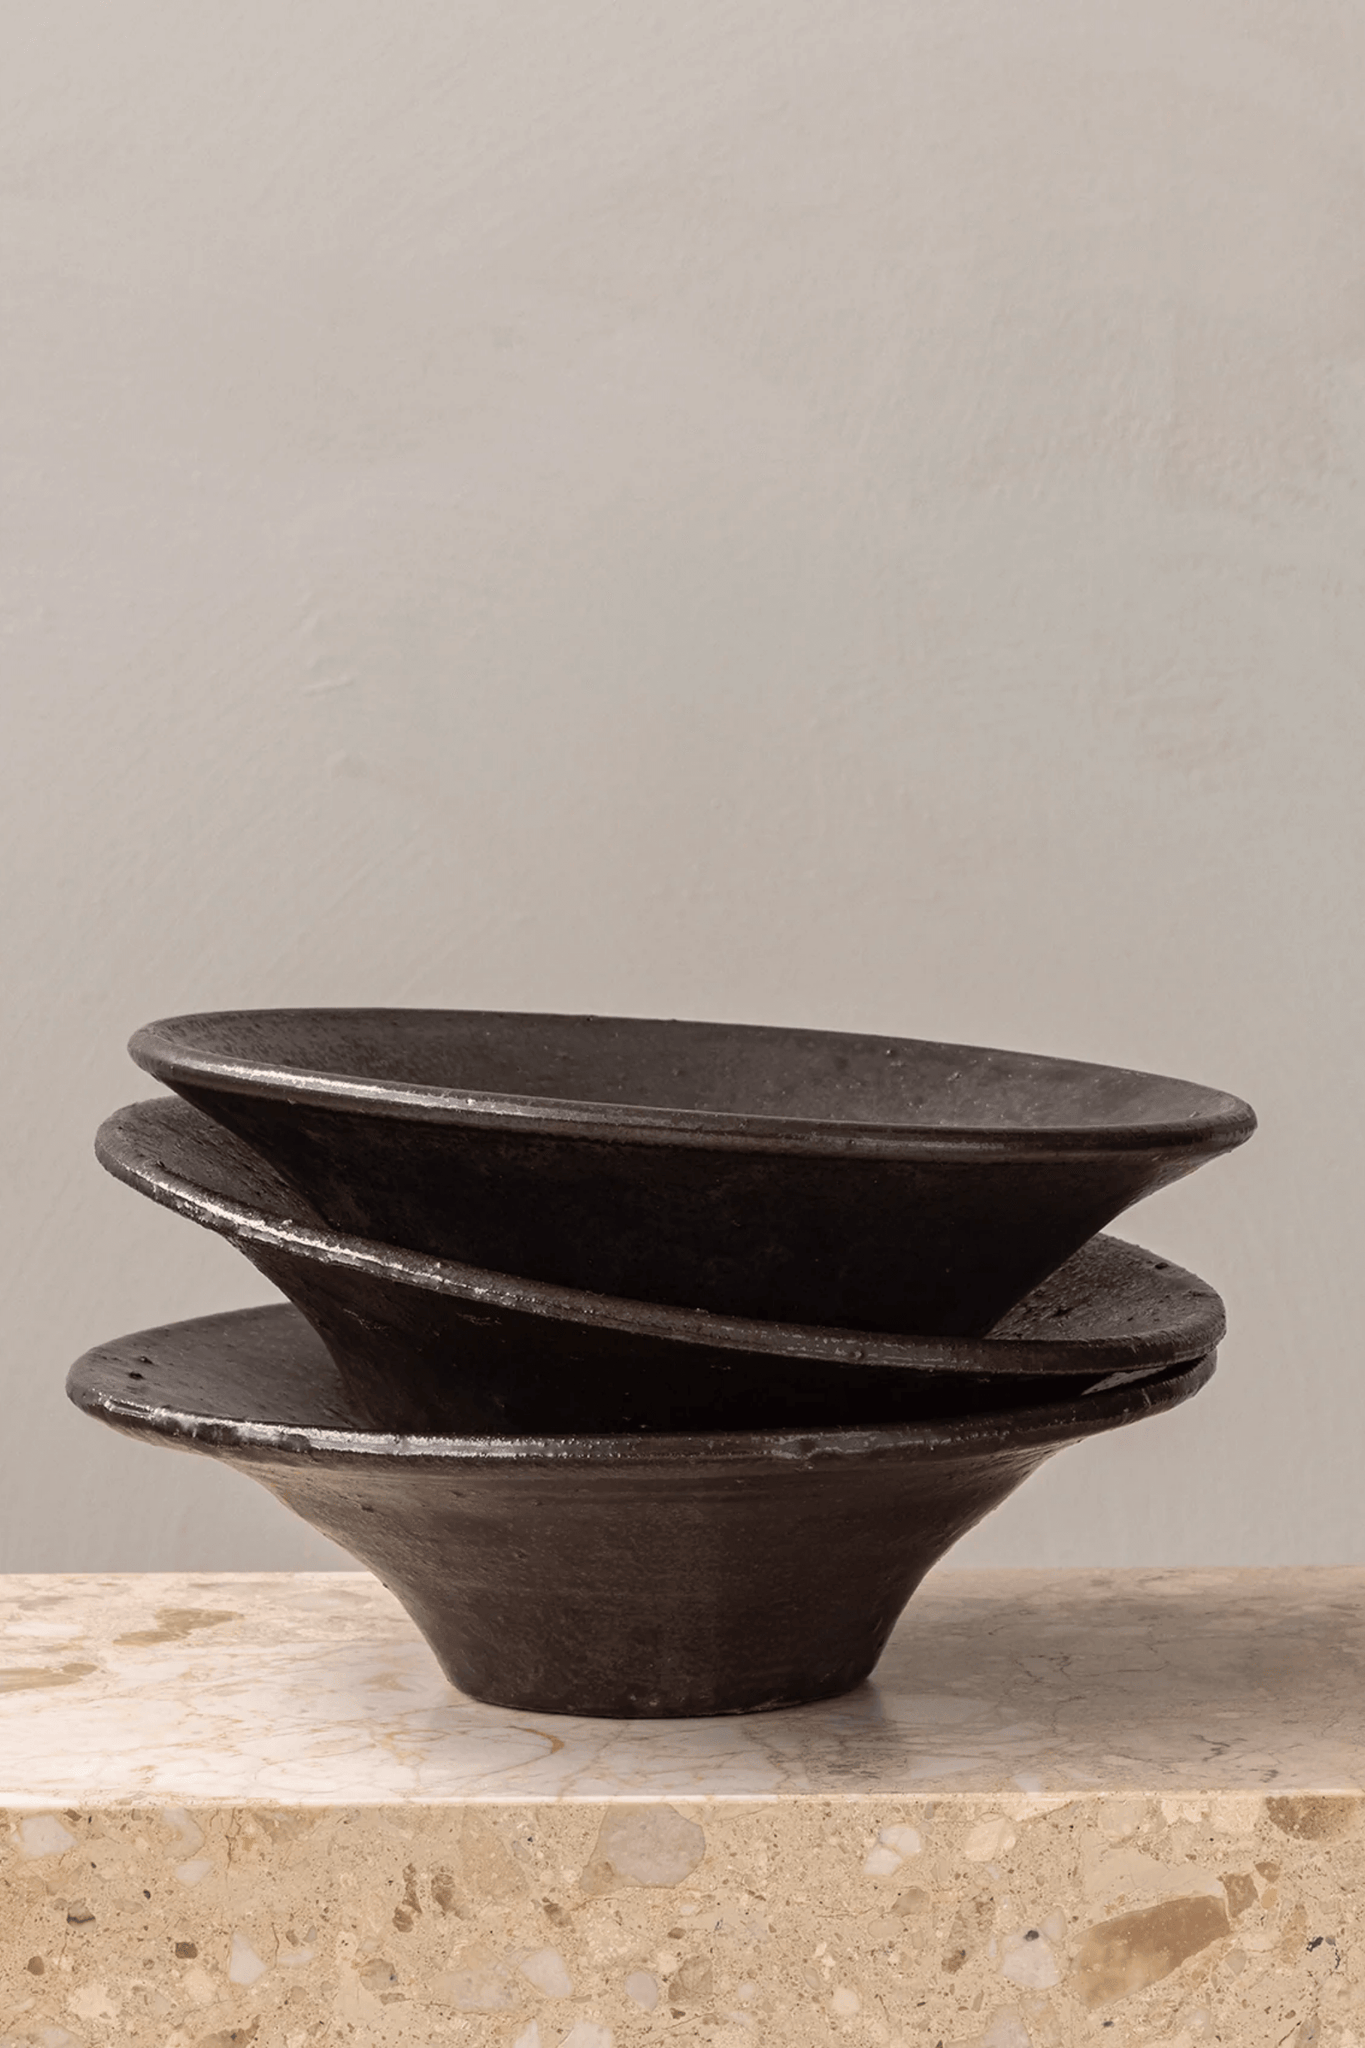 Mocha Triptych Bowl by Menu, shown stacked